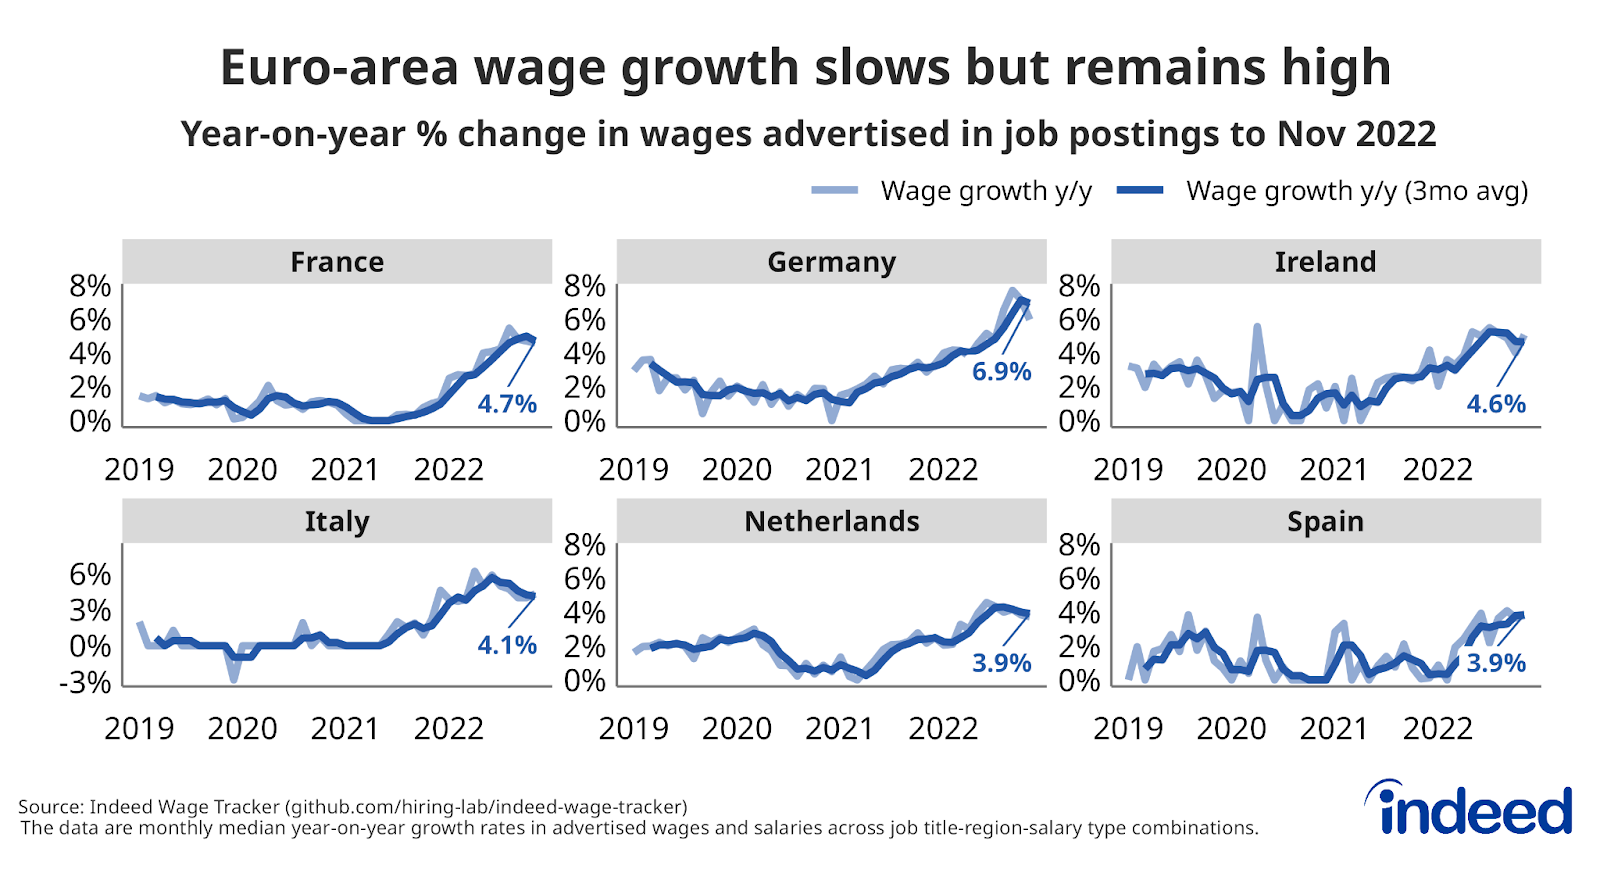 Series of line charts titled “Euro-area wage growth slows but remains high.”